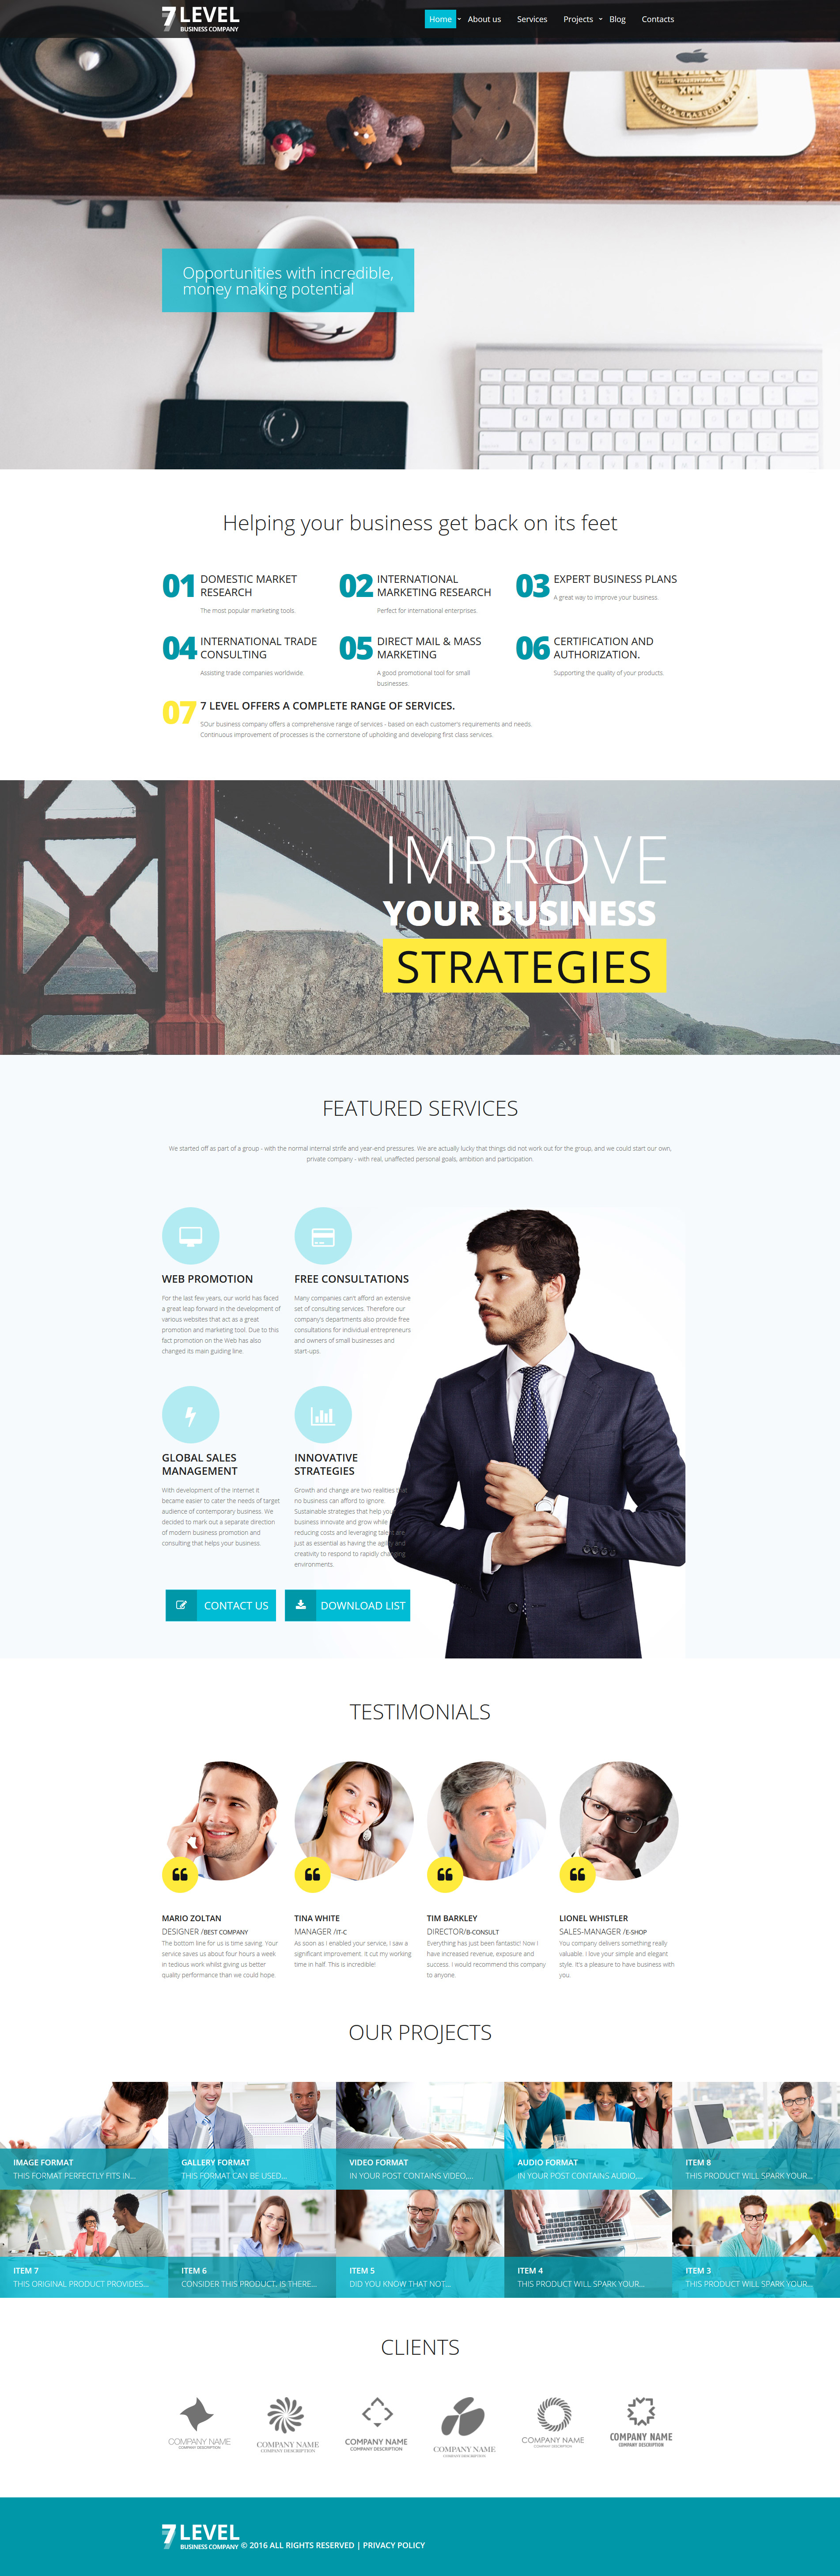 20 Level Website Template With Website Templates For Small Business